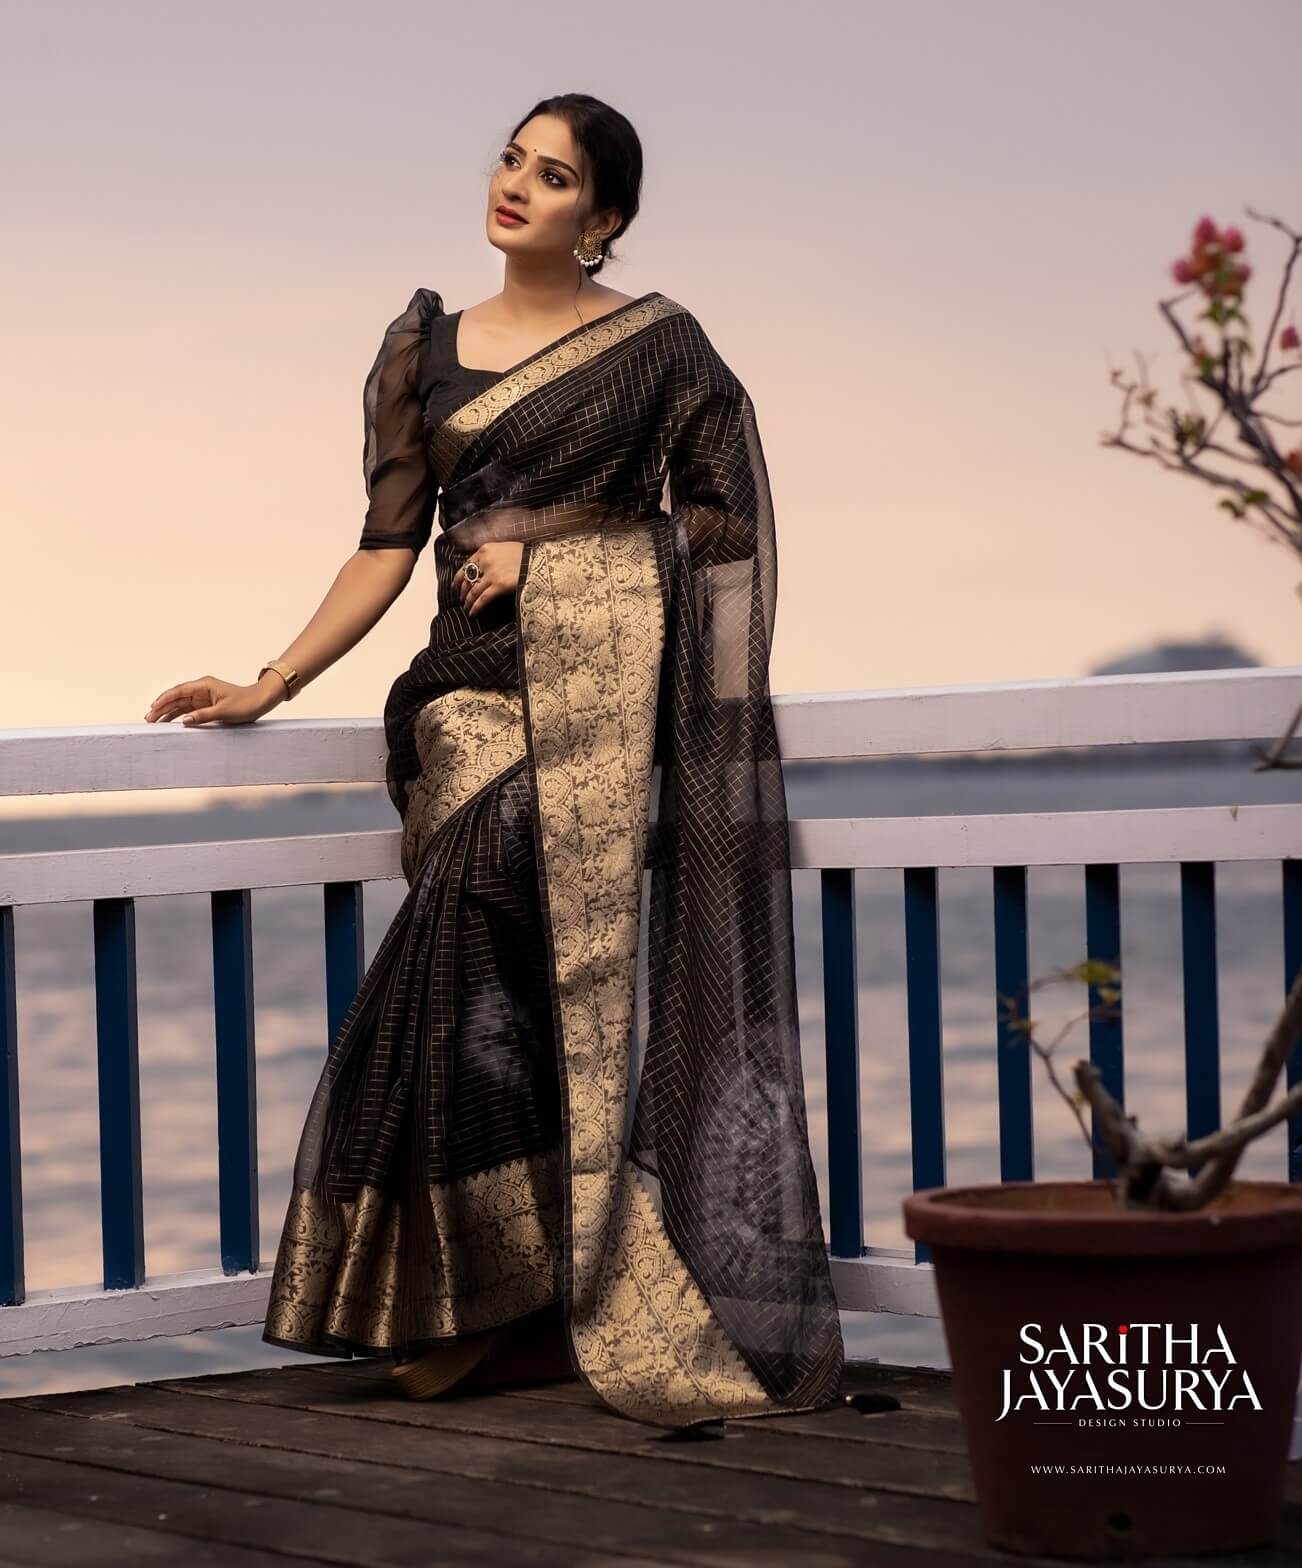 Aditi Ravi Poise Look In Black Zari Woven Cotton Blend Saree With Puffed Sleeves Blouse Inspired Best Outfit & Looks Collection